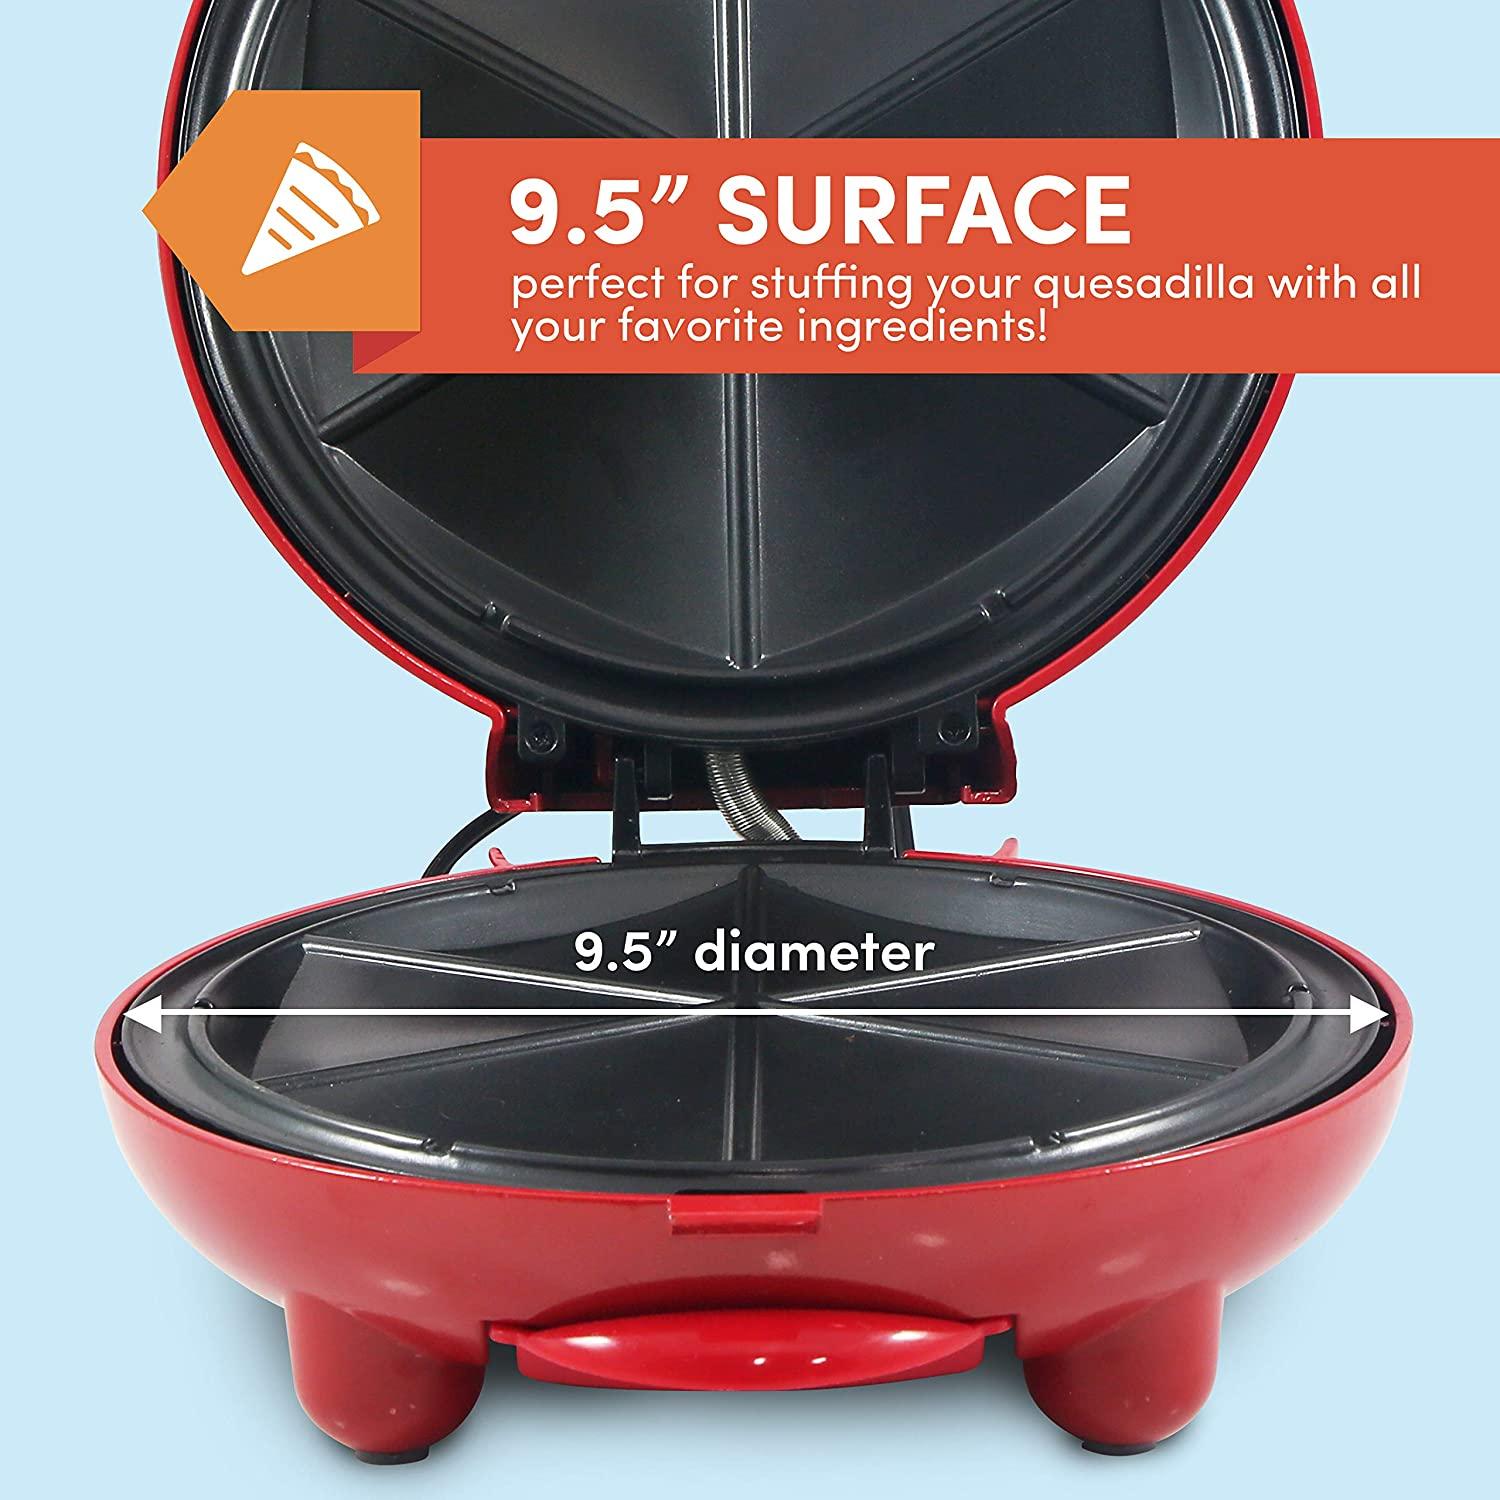 11 Non-Stick Electric Quesadilla Maker - 6-Wedges (Red)